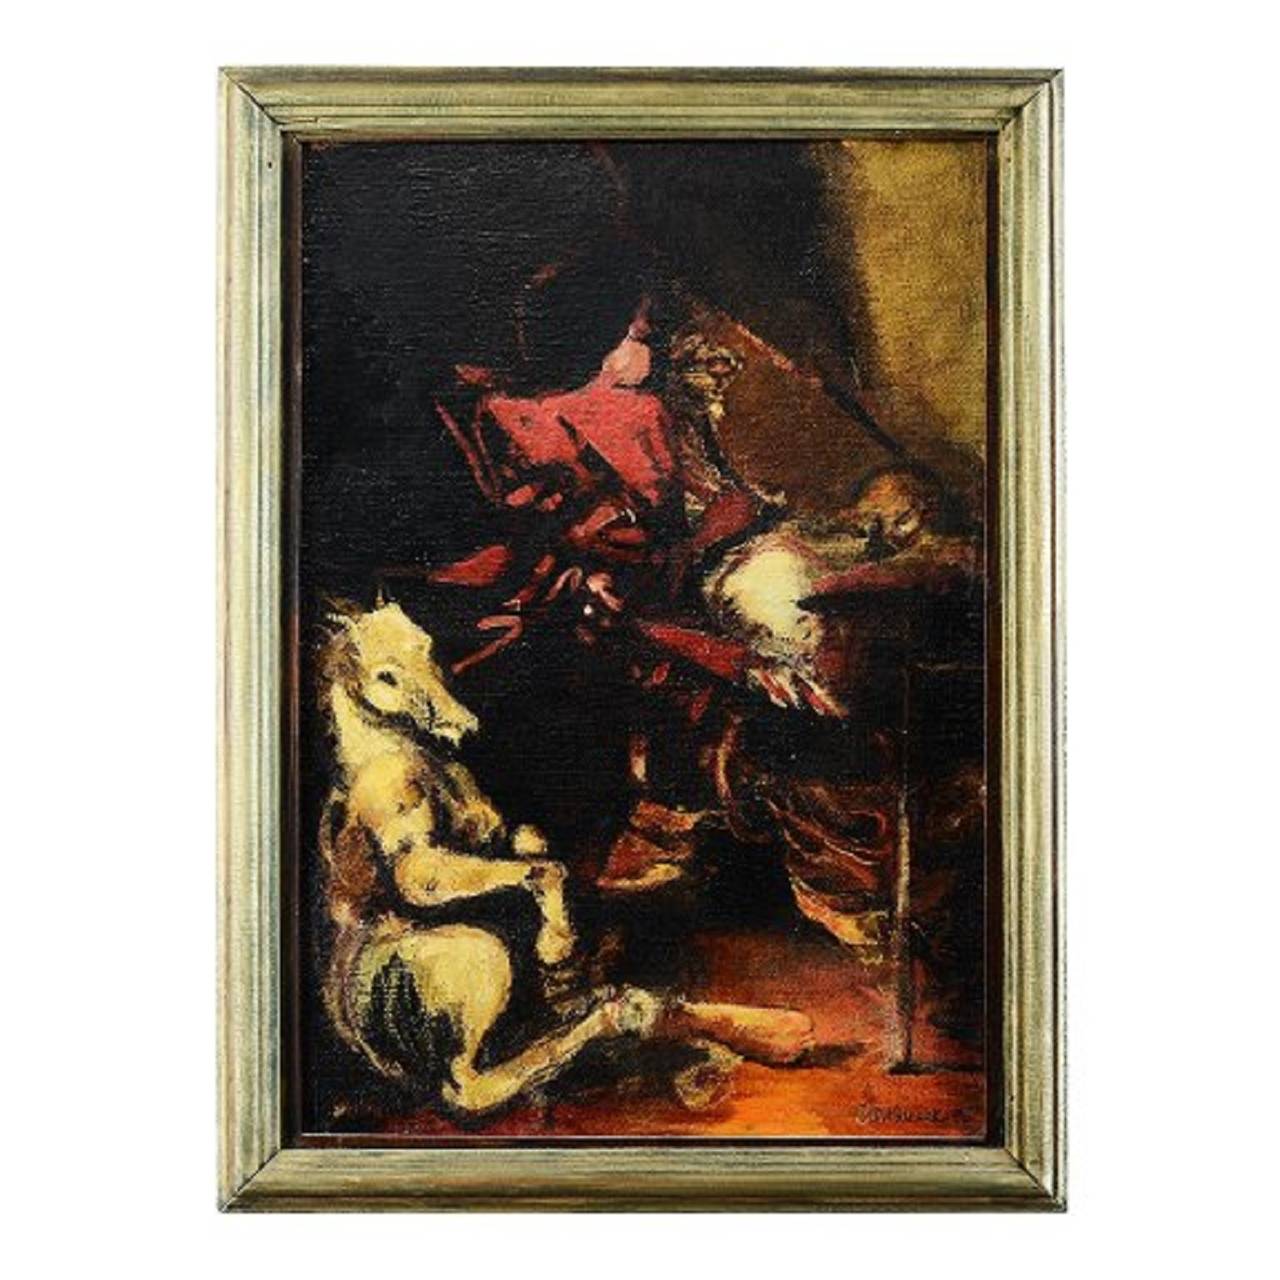 Stanislaw Masiak (1939-1979) Polish artist
Oil on canvas.
Signed, dated 1975.
Bullfighter.
In very good condition.
55x38 (63x46.5) cm.